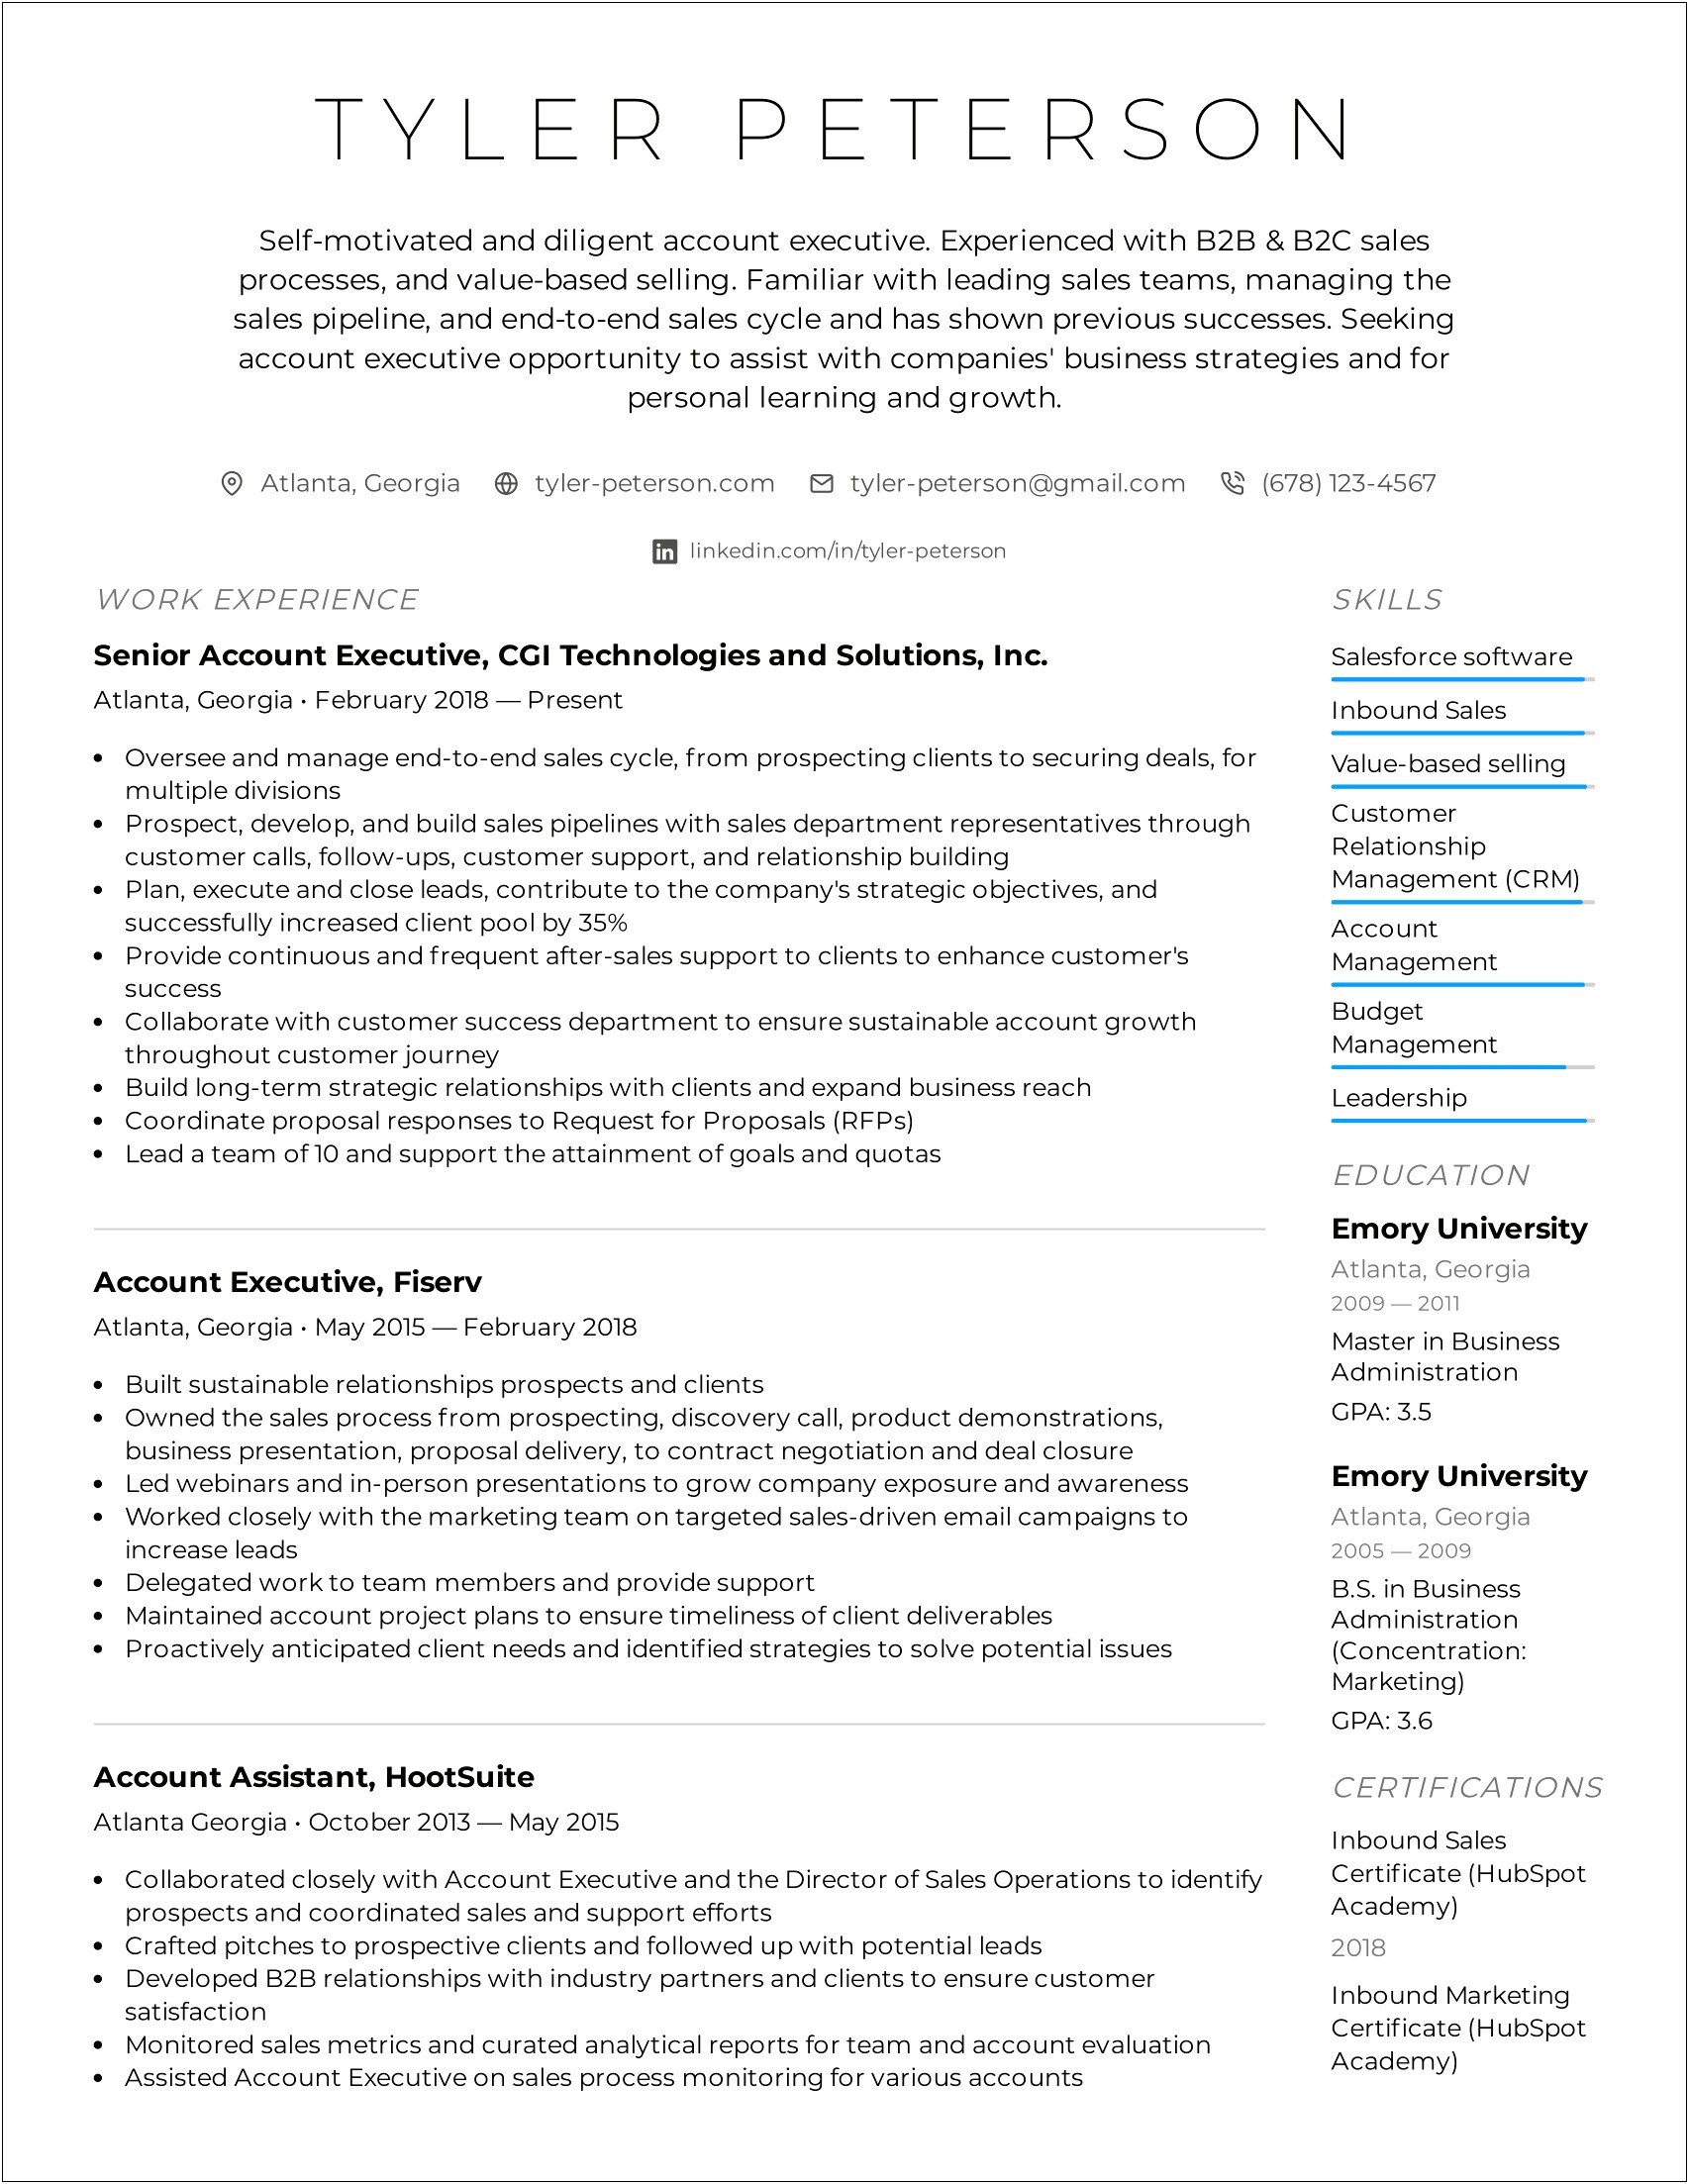 Resume Profile Examples For Business Administration